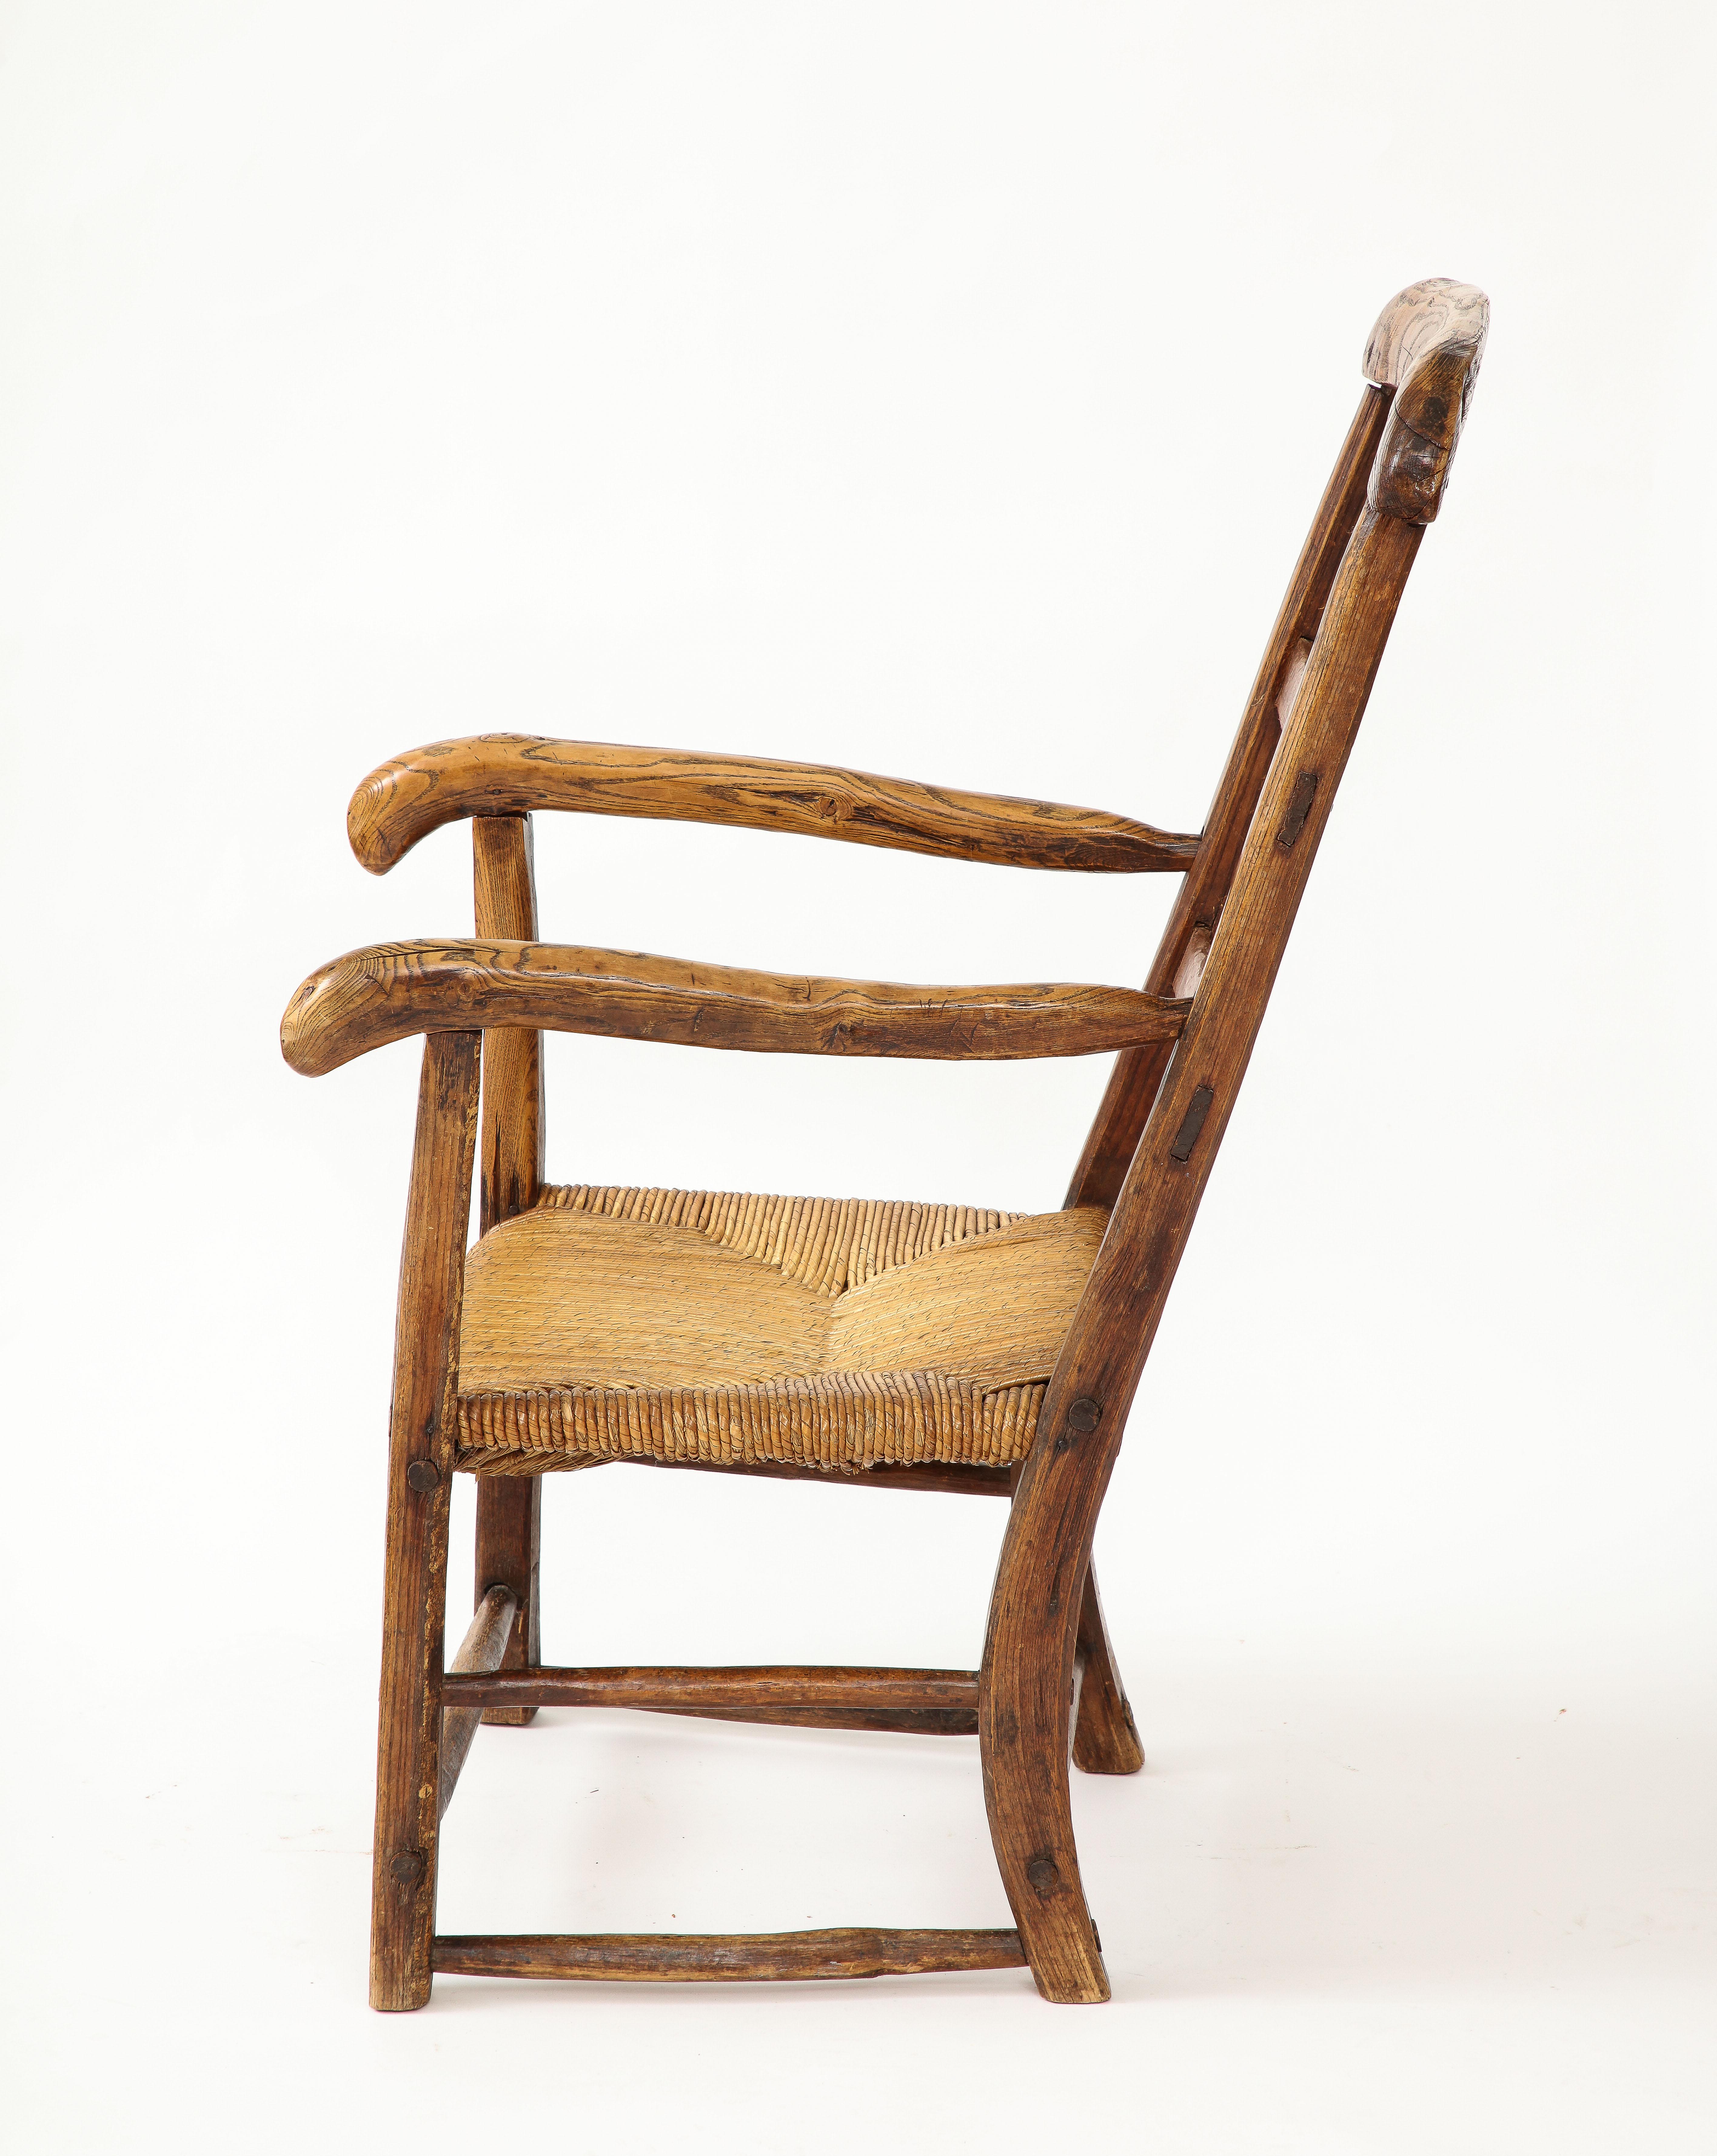 19th Century Rustic French Chair with Straw Seat For Sale 3